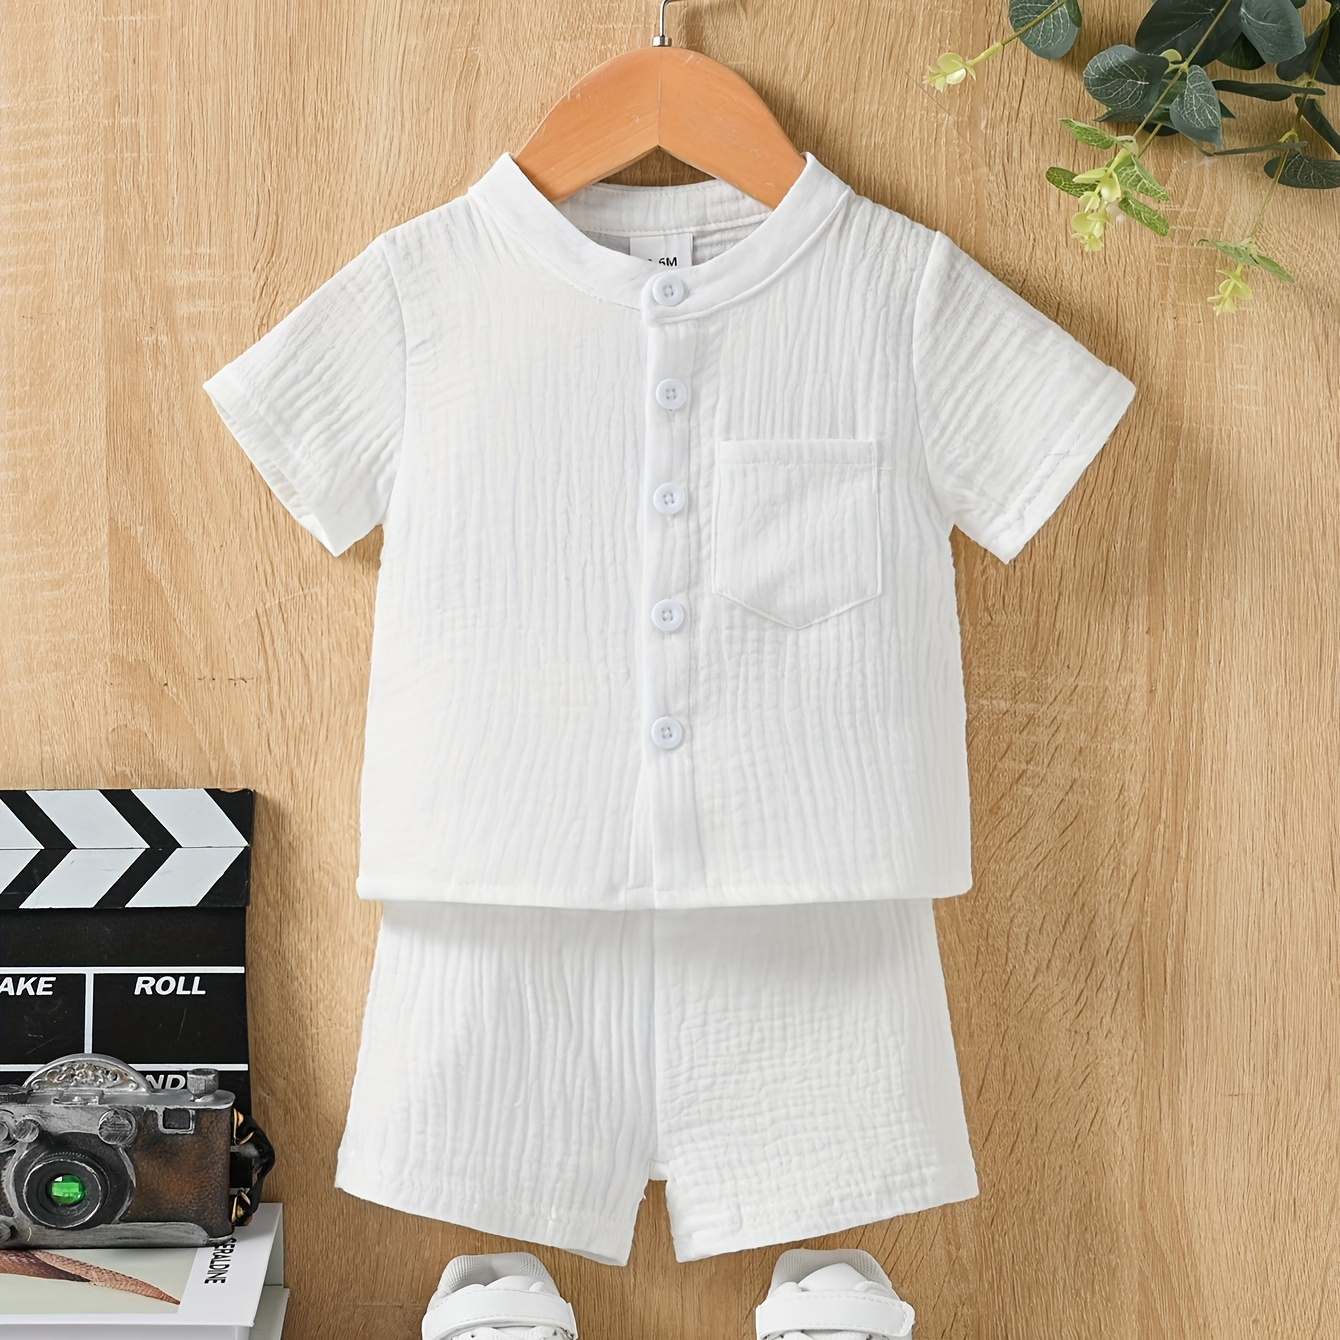 

2pcs Baby Boy's Cotton Muslin Soild Casual Outfit, Stand Collar Shirt + Shorts Set, Casual Comfy Breathable Outfit, Toddler Summer Clothing